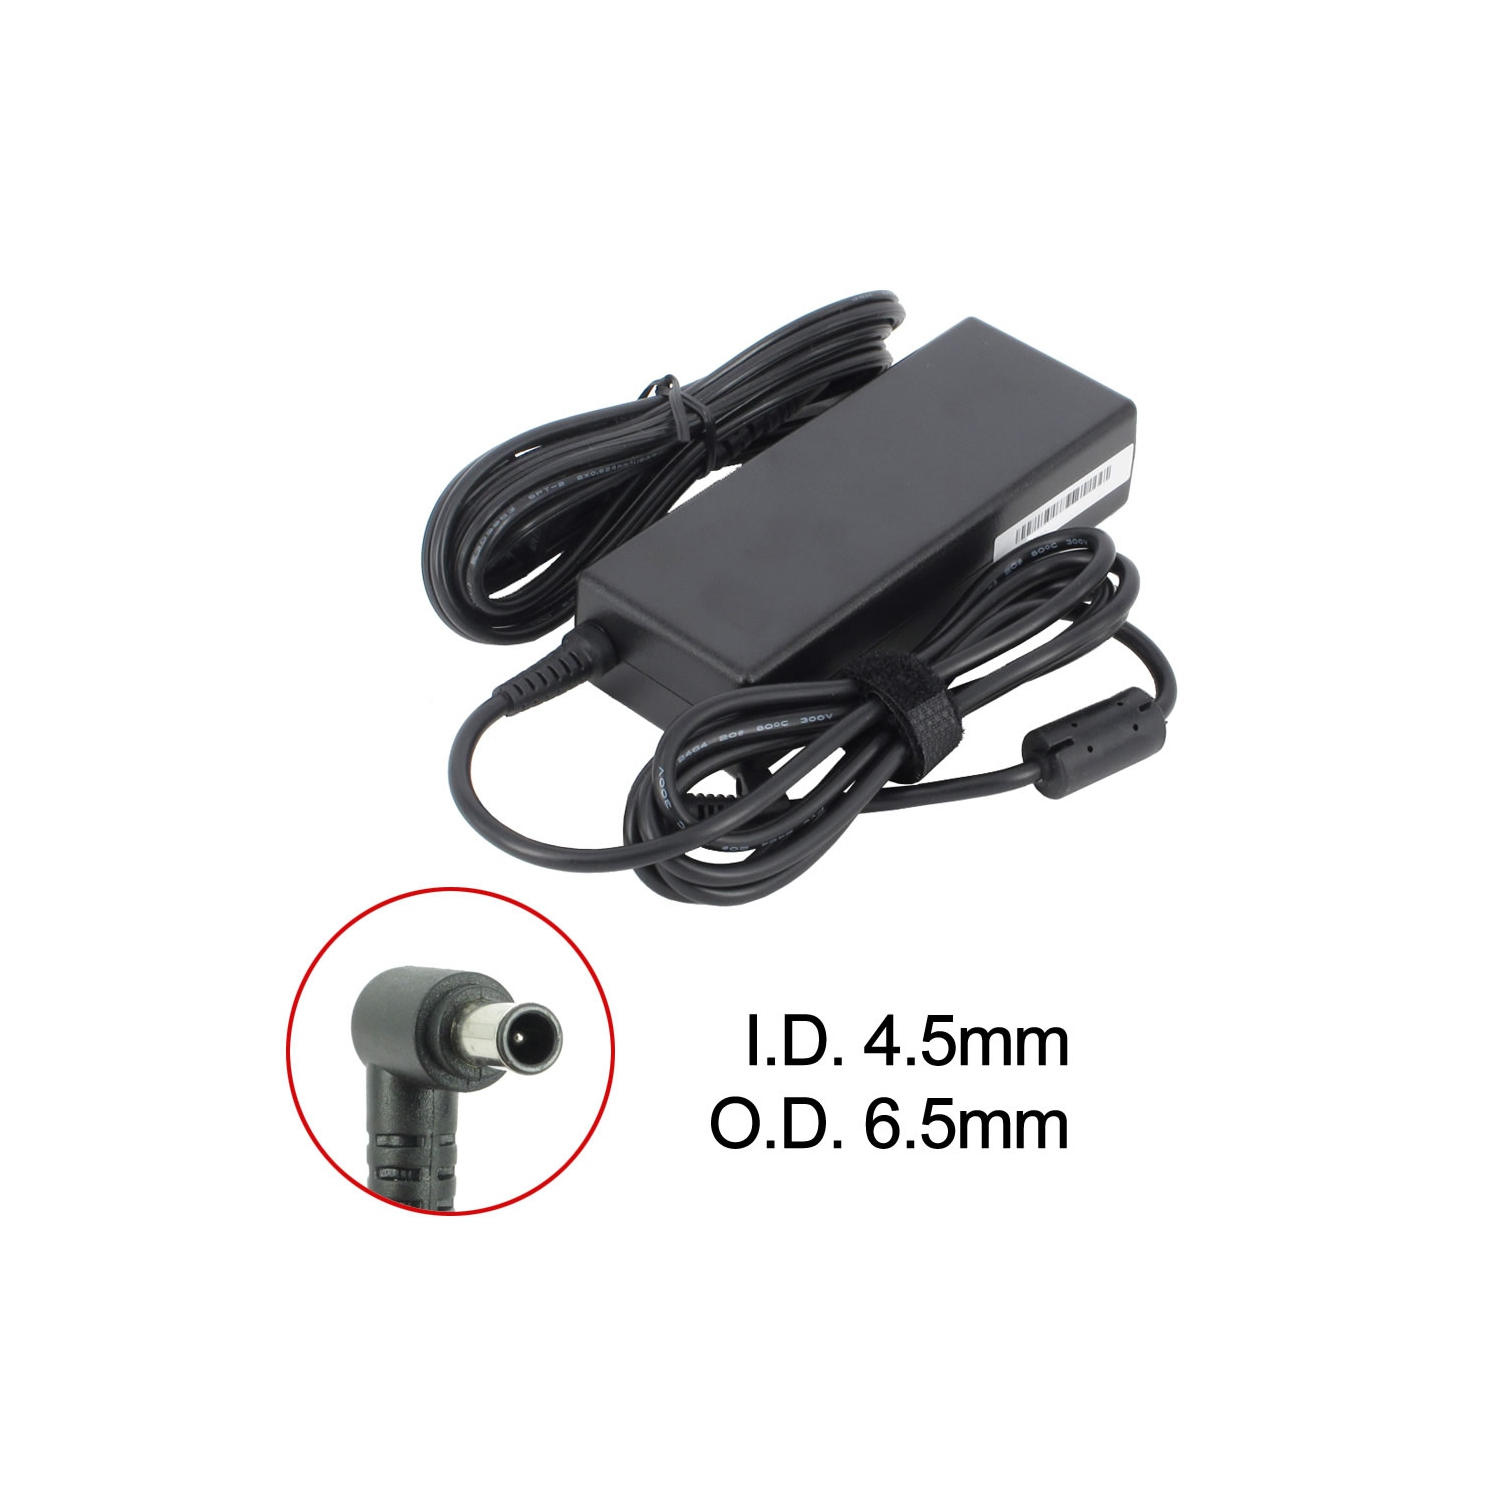 Brand New Laptop AC Adapter for Sony VAIO VGN-SZ260 Series, PCGA-AC19V12, VGP-AC19V11, VGP-AC19V22, VGP-AC19V32, VGP-AC19V71